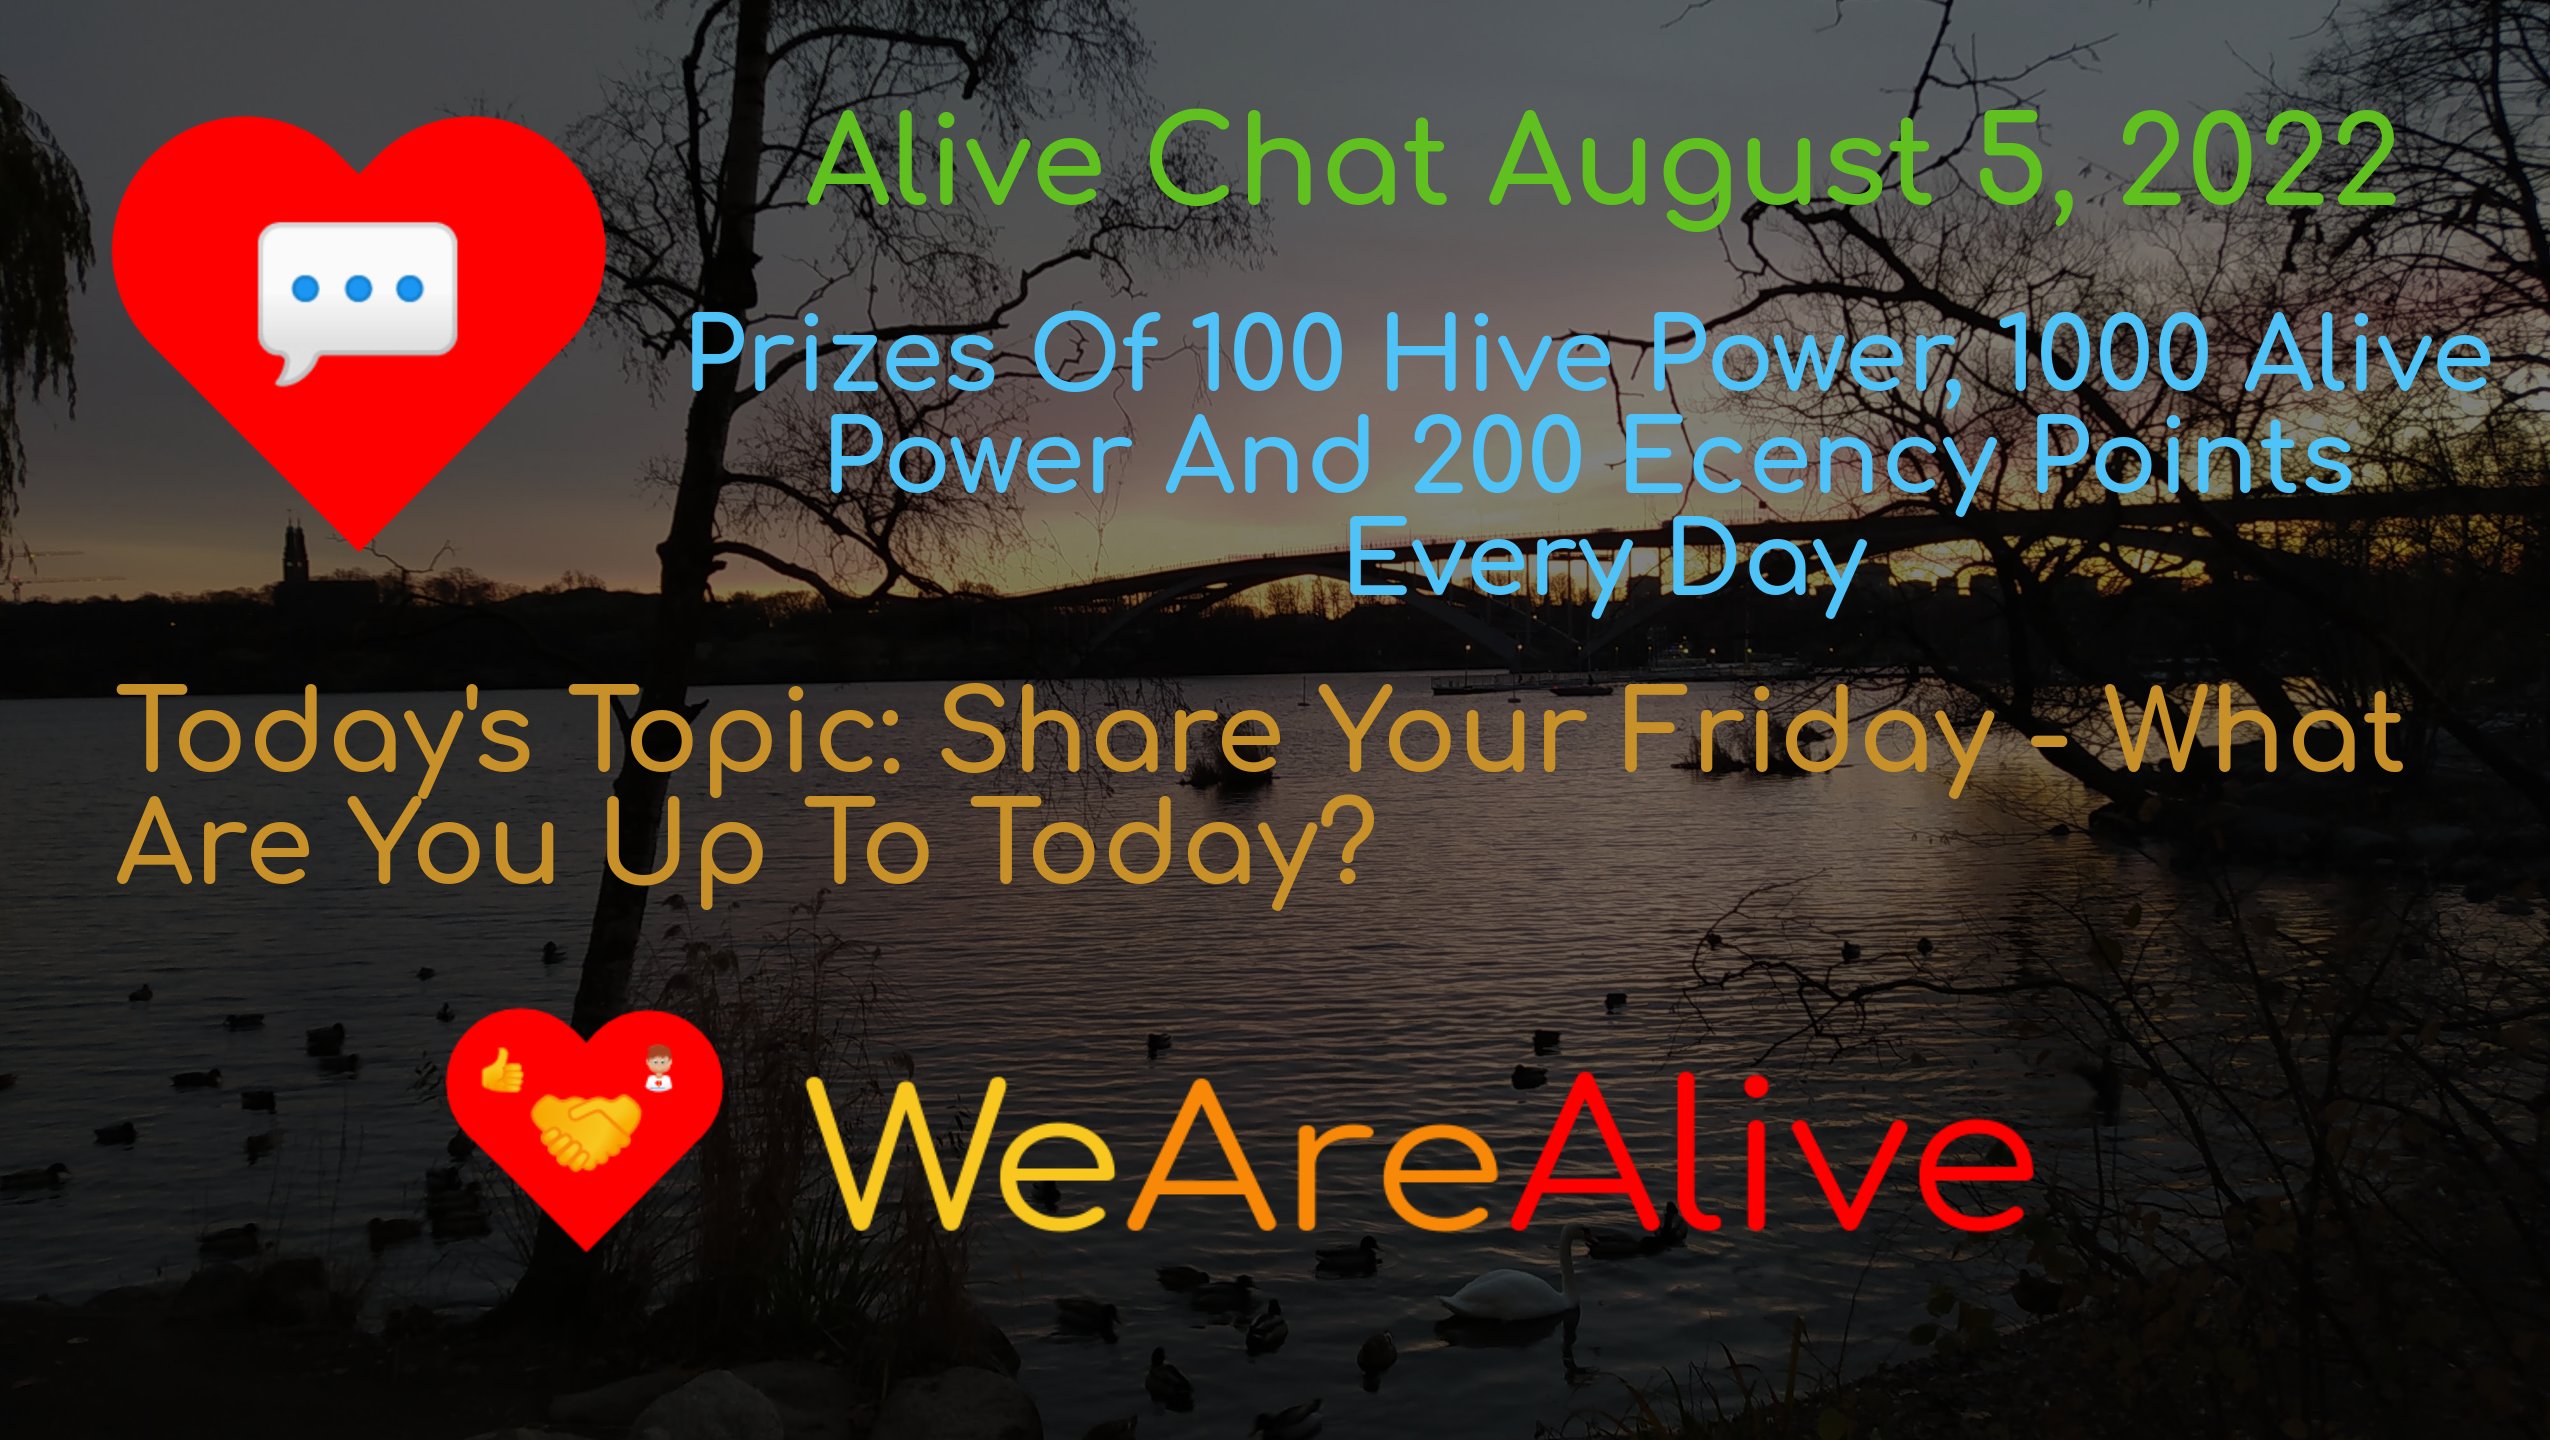 @alive.chat/alive-chat-august-5-2022-daily-prize-drawing-open-for-entries-todays-topic-share-your-friday-what-are-you-up-to-today